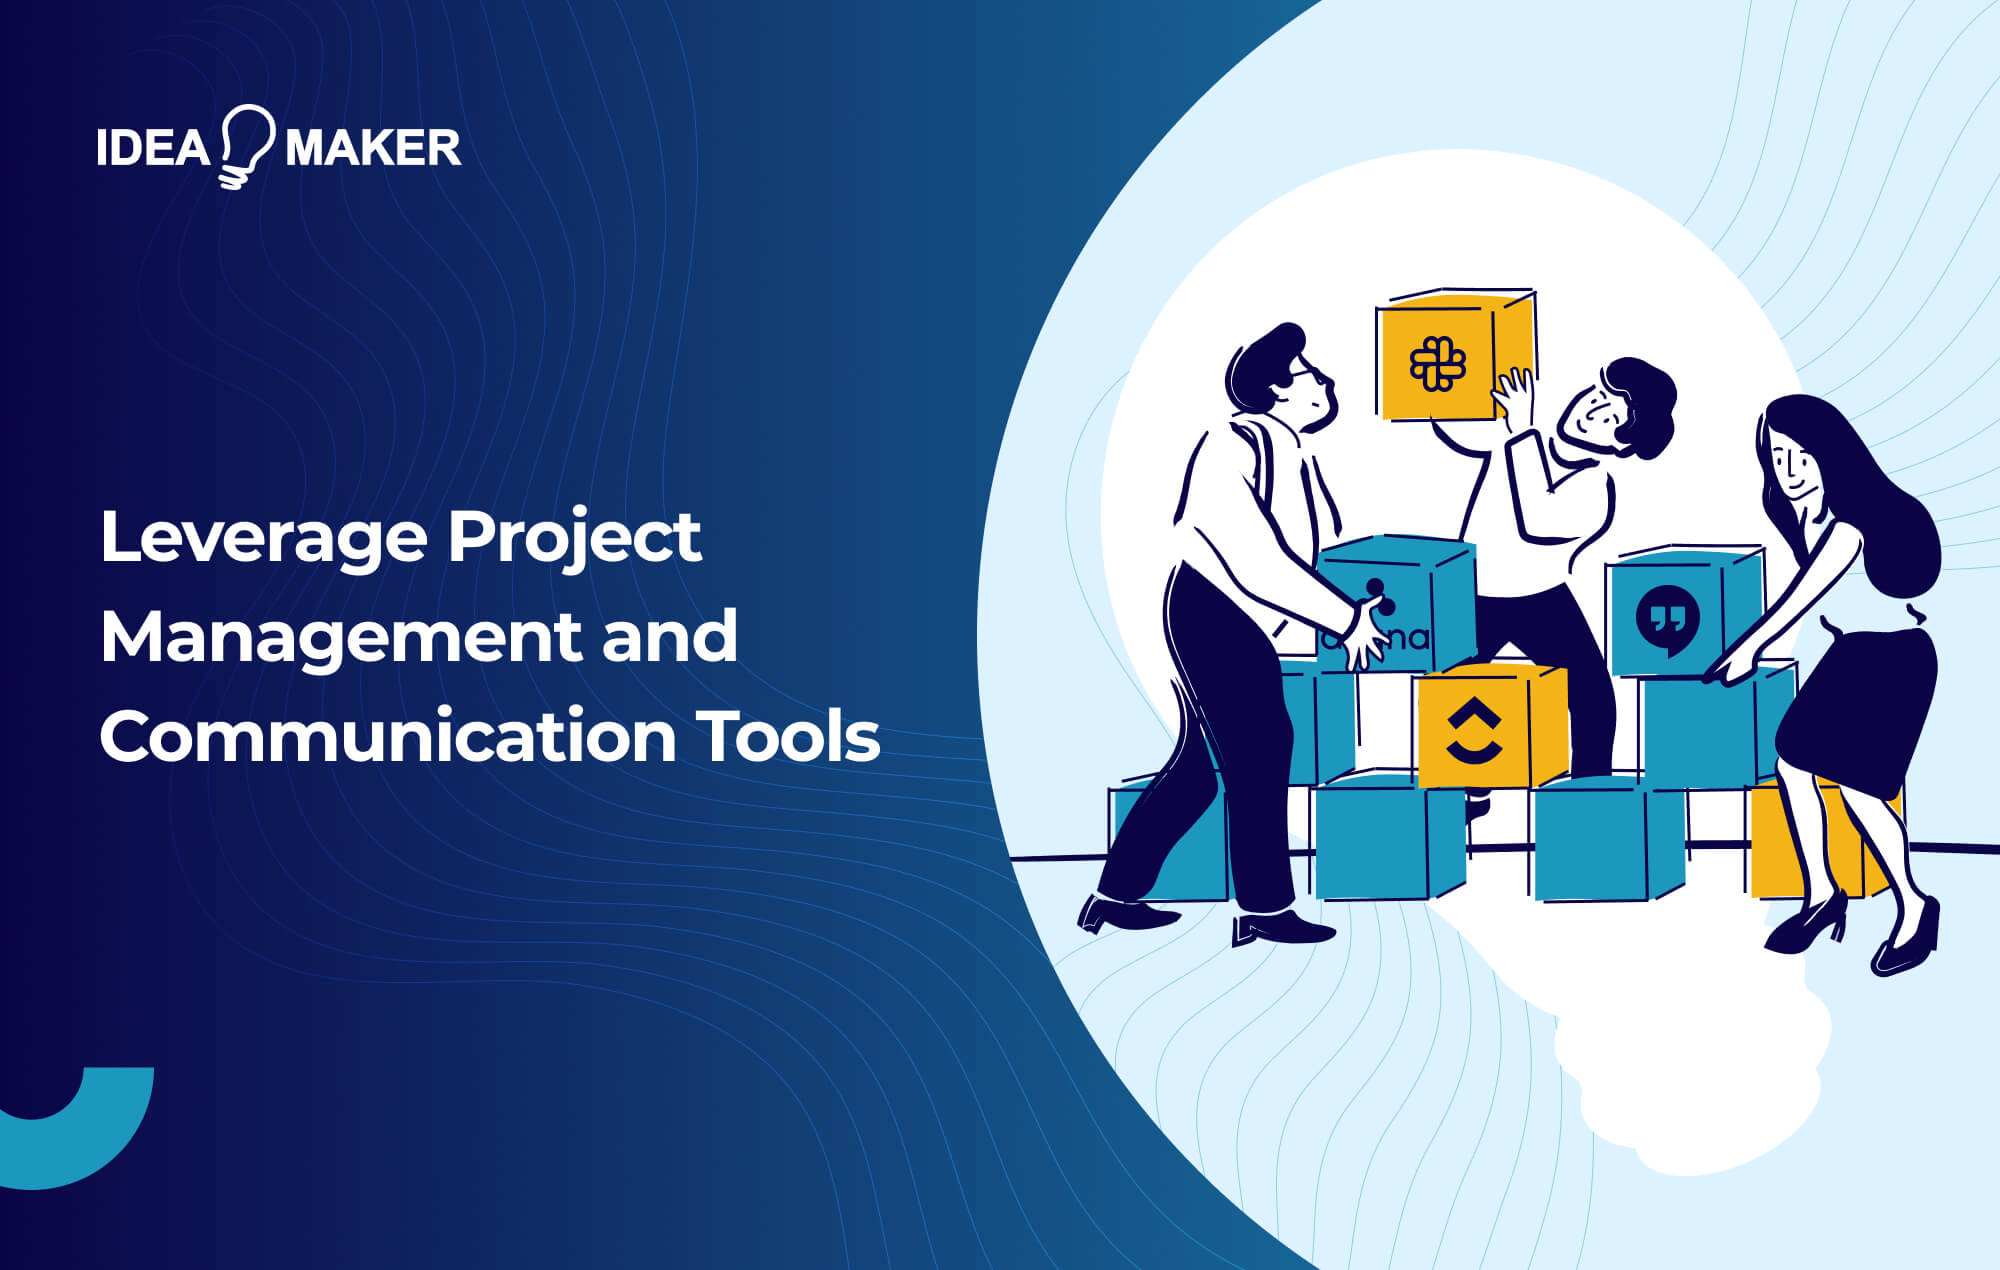 Ideamaker - Leverage Project Management and Communication Tools